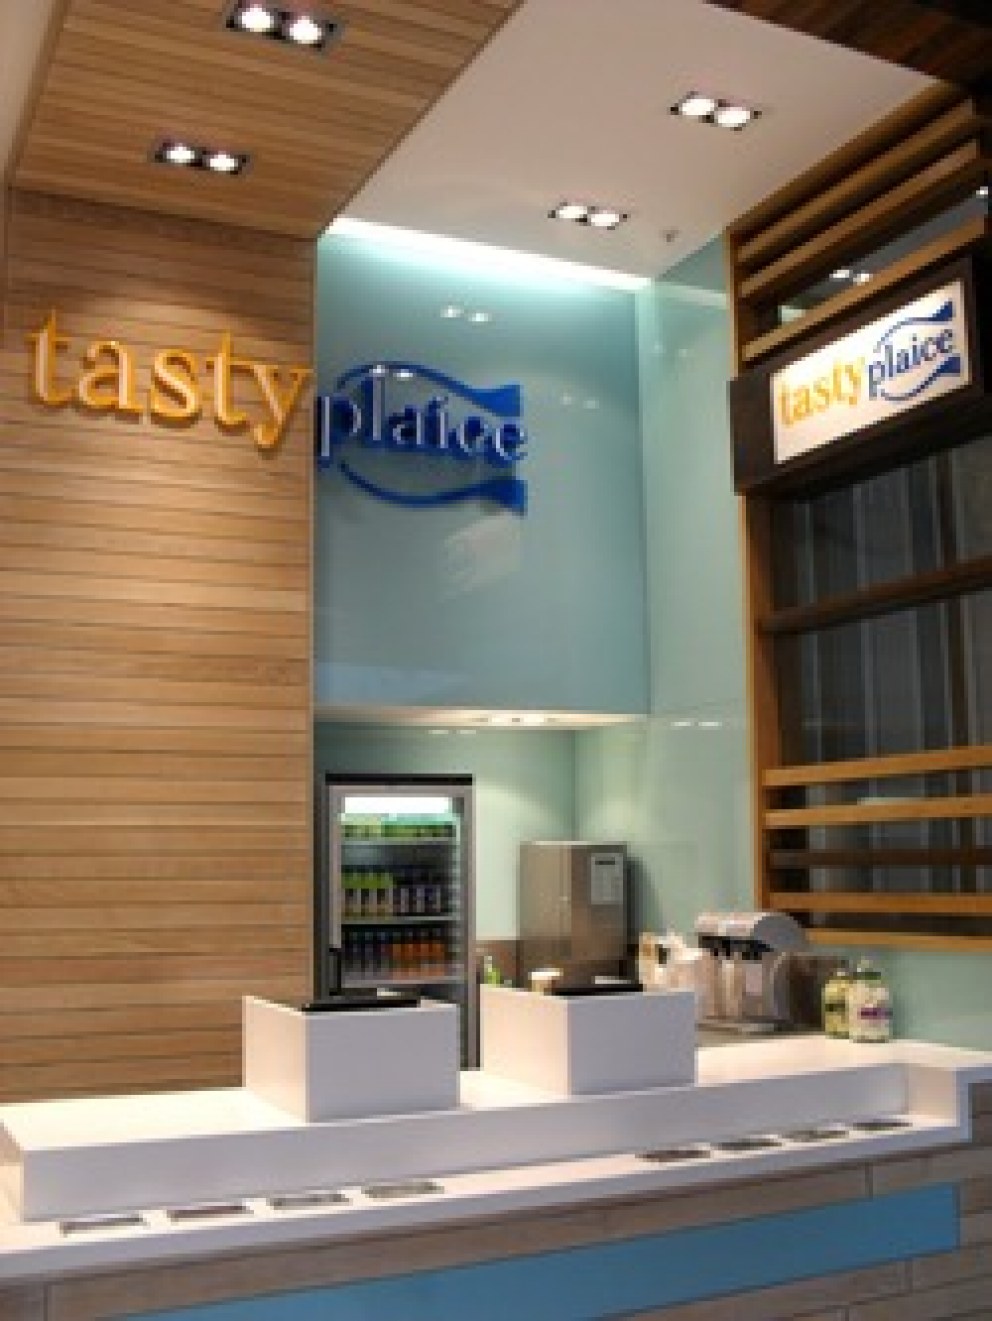 Tasty Plaice, Eat Central, Merry Hill | Signage | Interior Designers